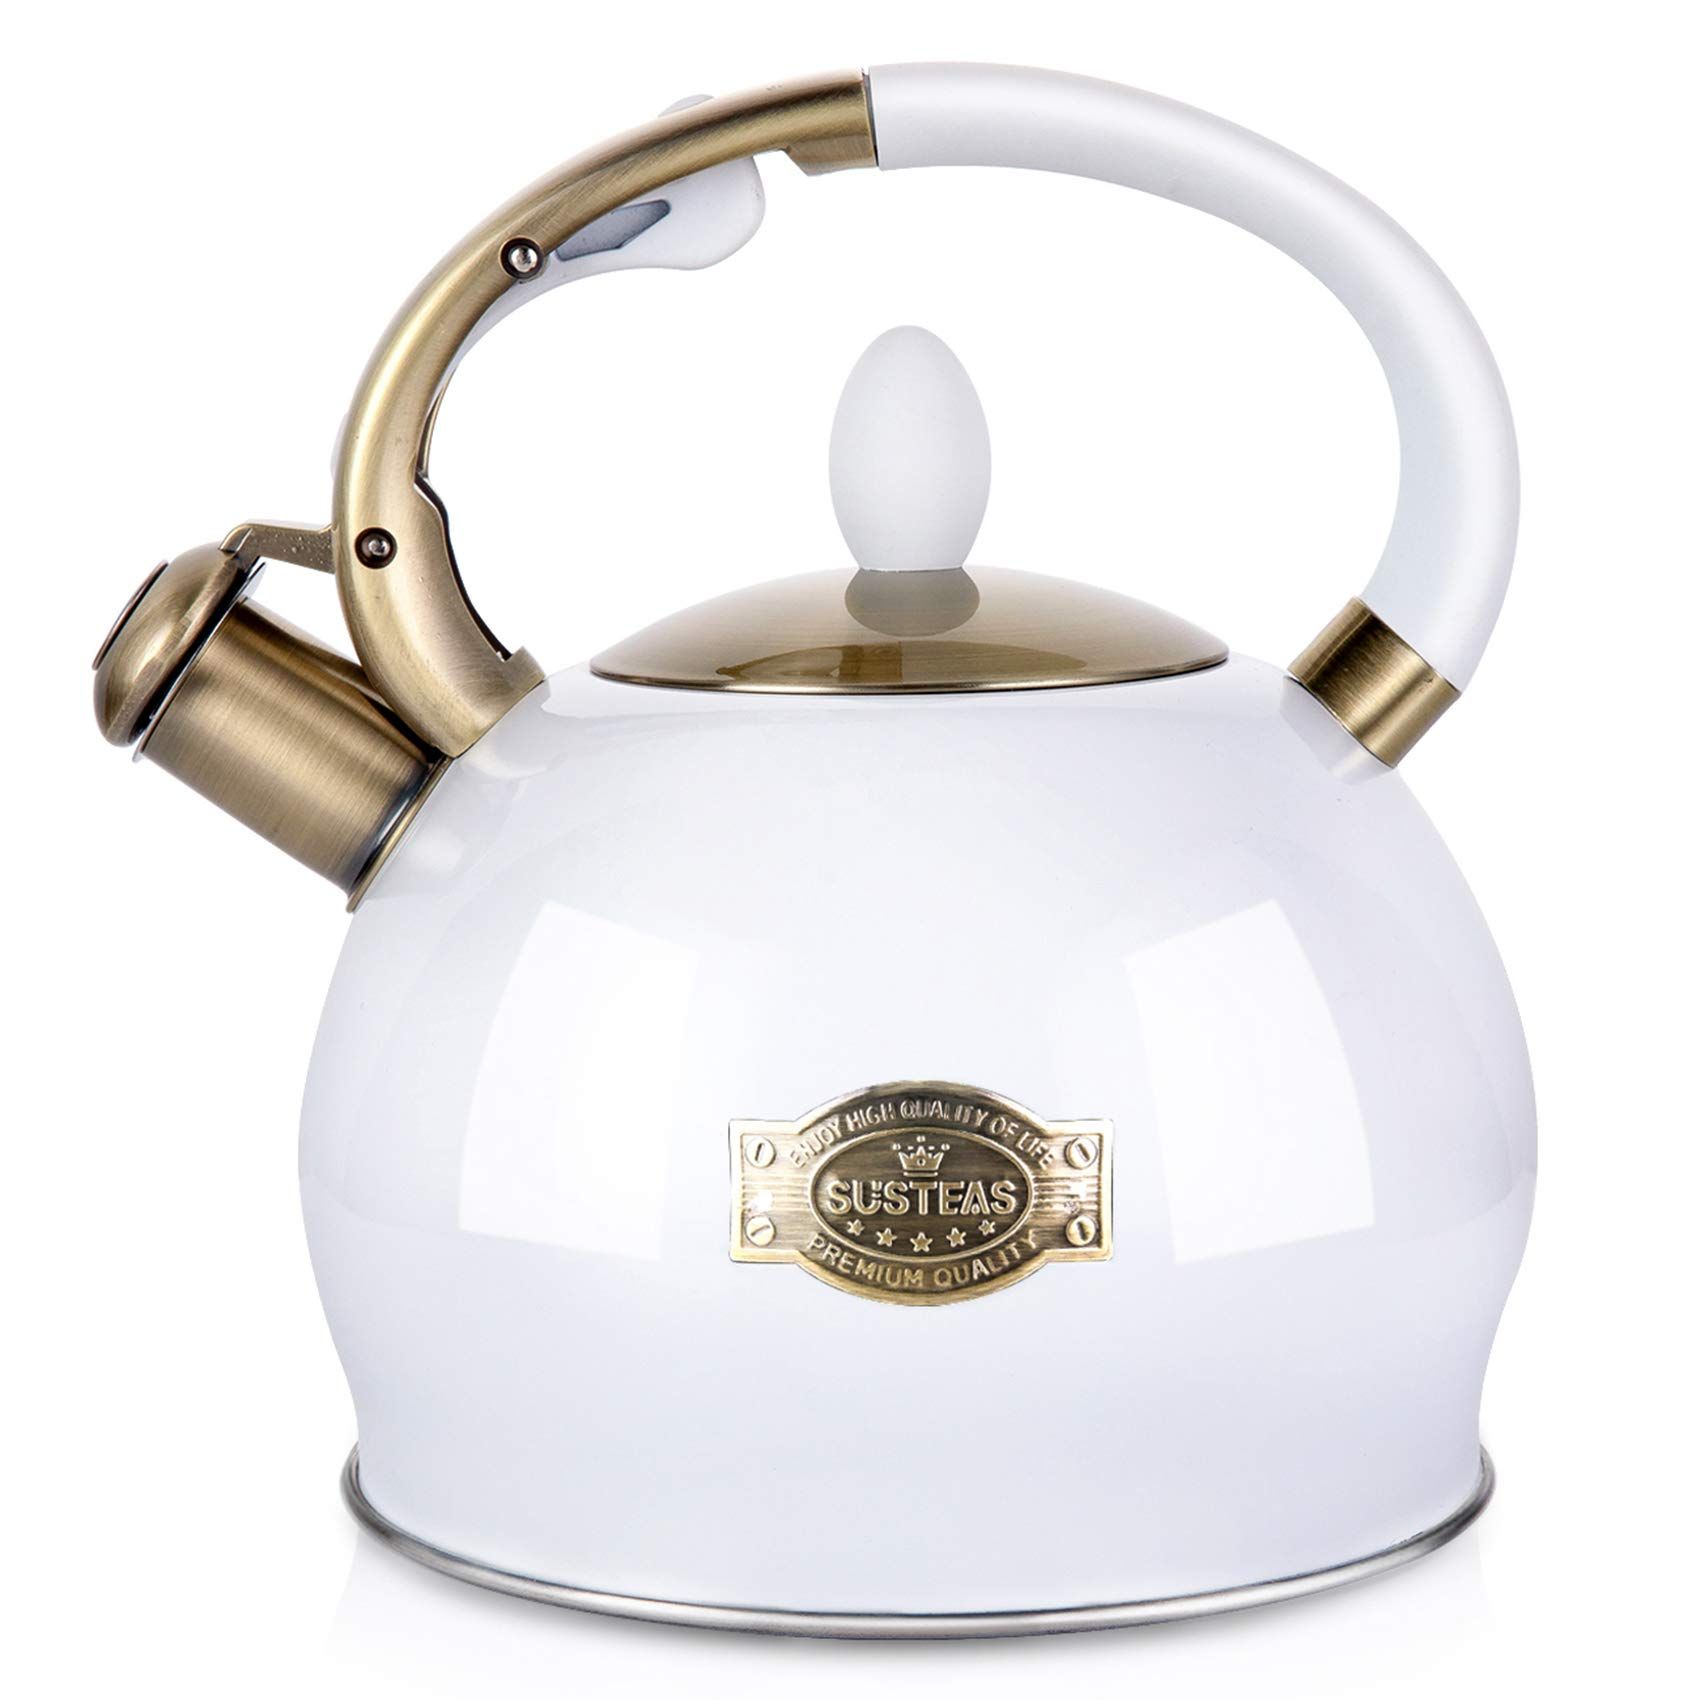 SUSTEAS Stove Top Whistling Tea Kettle-Surgical Stainless Steel Teakettle Teapot with Cool Toch Ergo | Amazon (US)